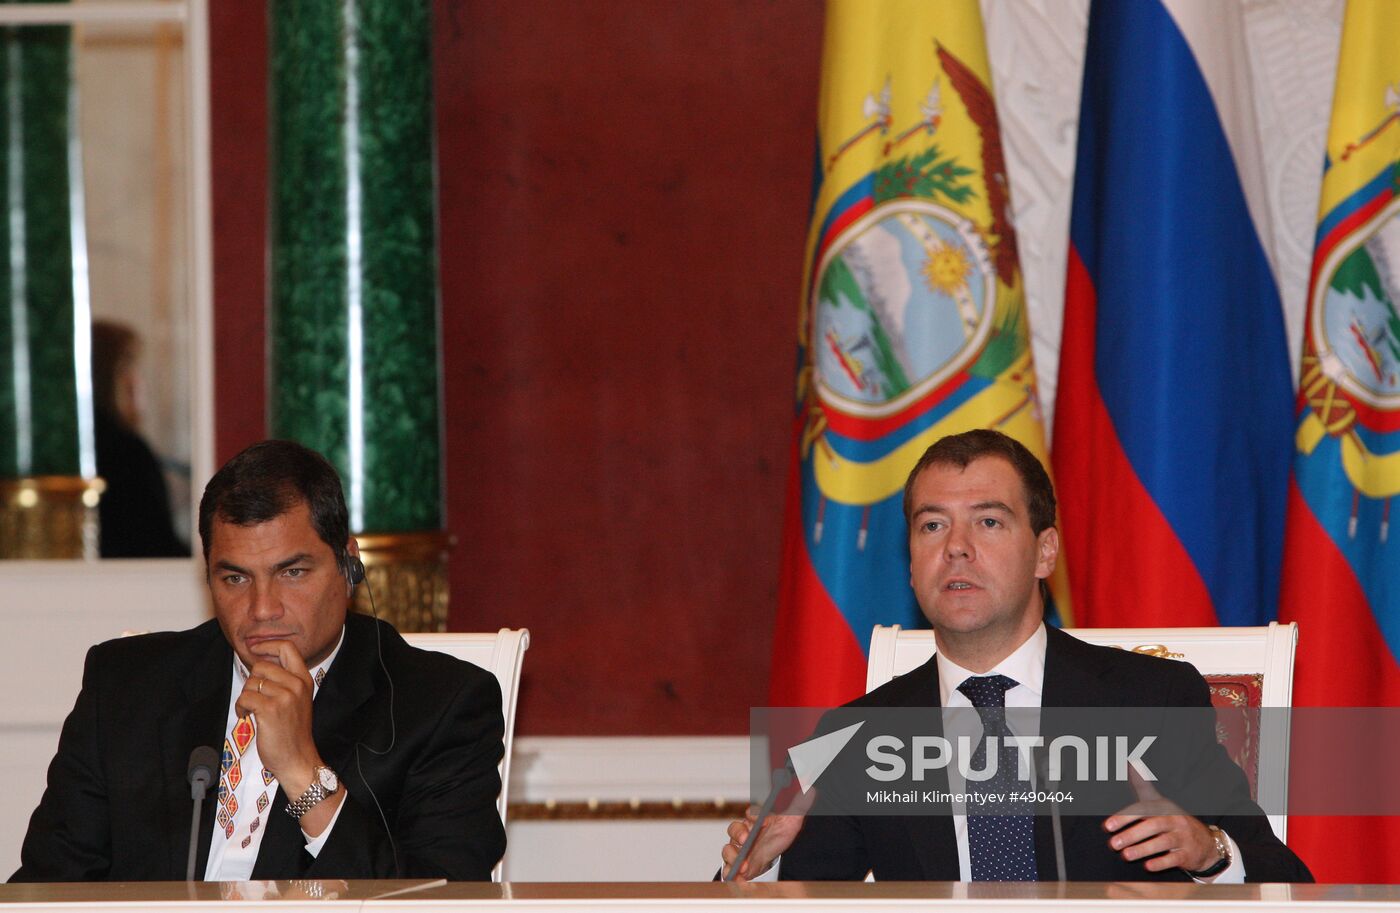 Russian, Ecuadorian presidents hold joint press conference